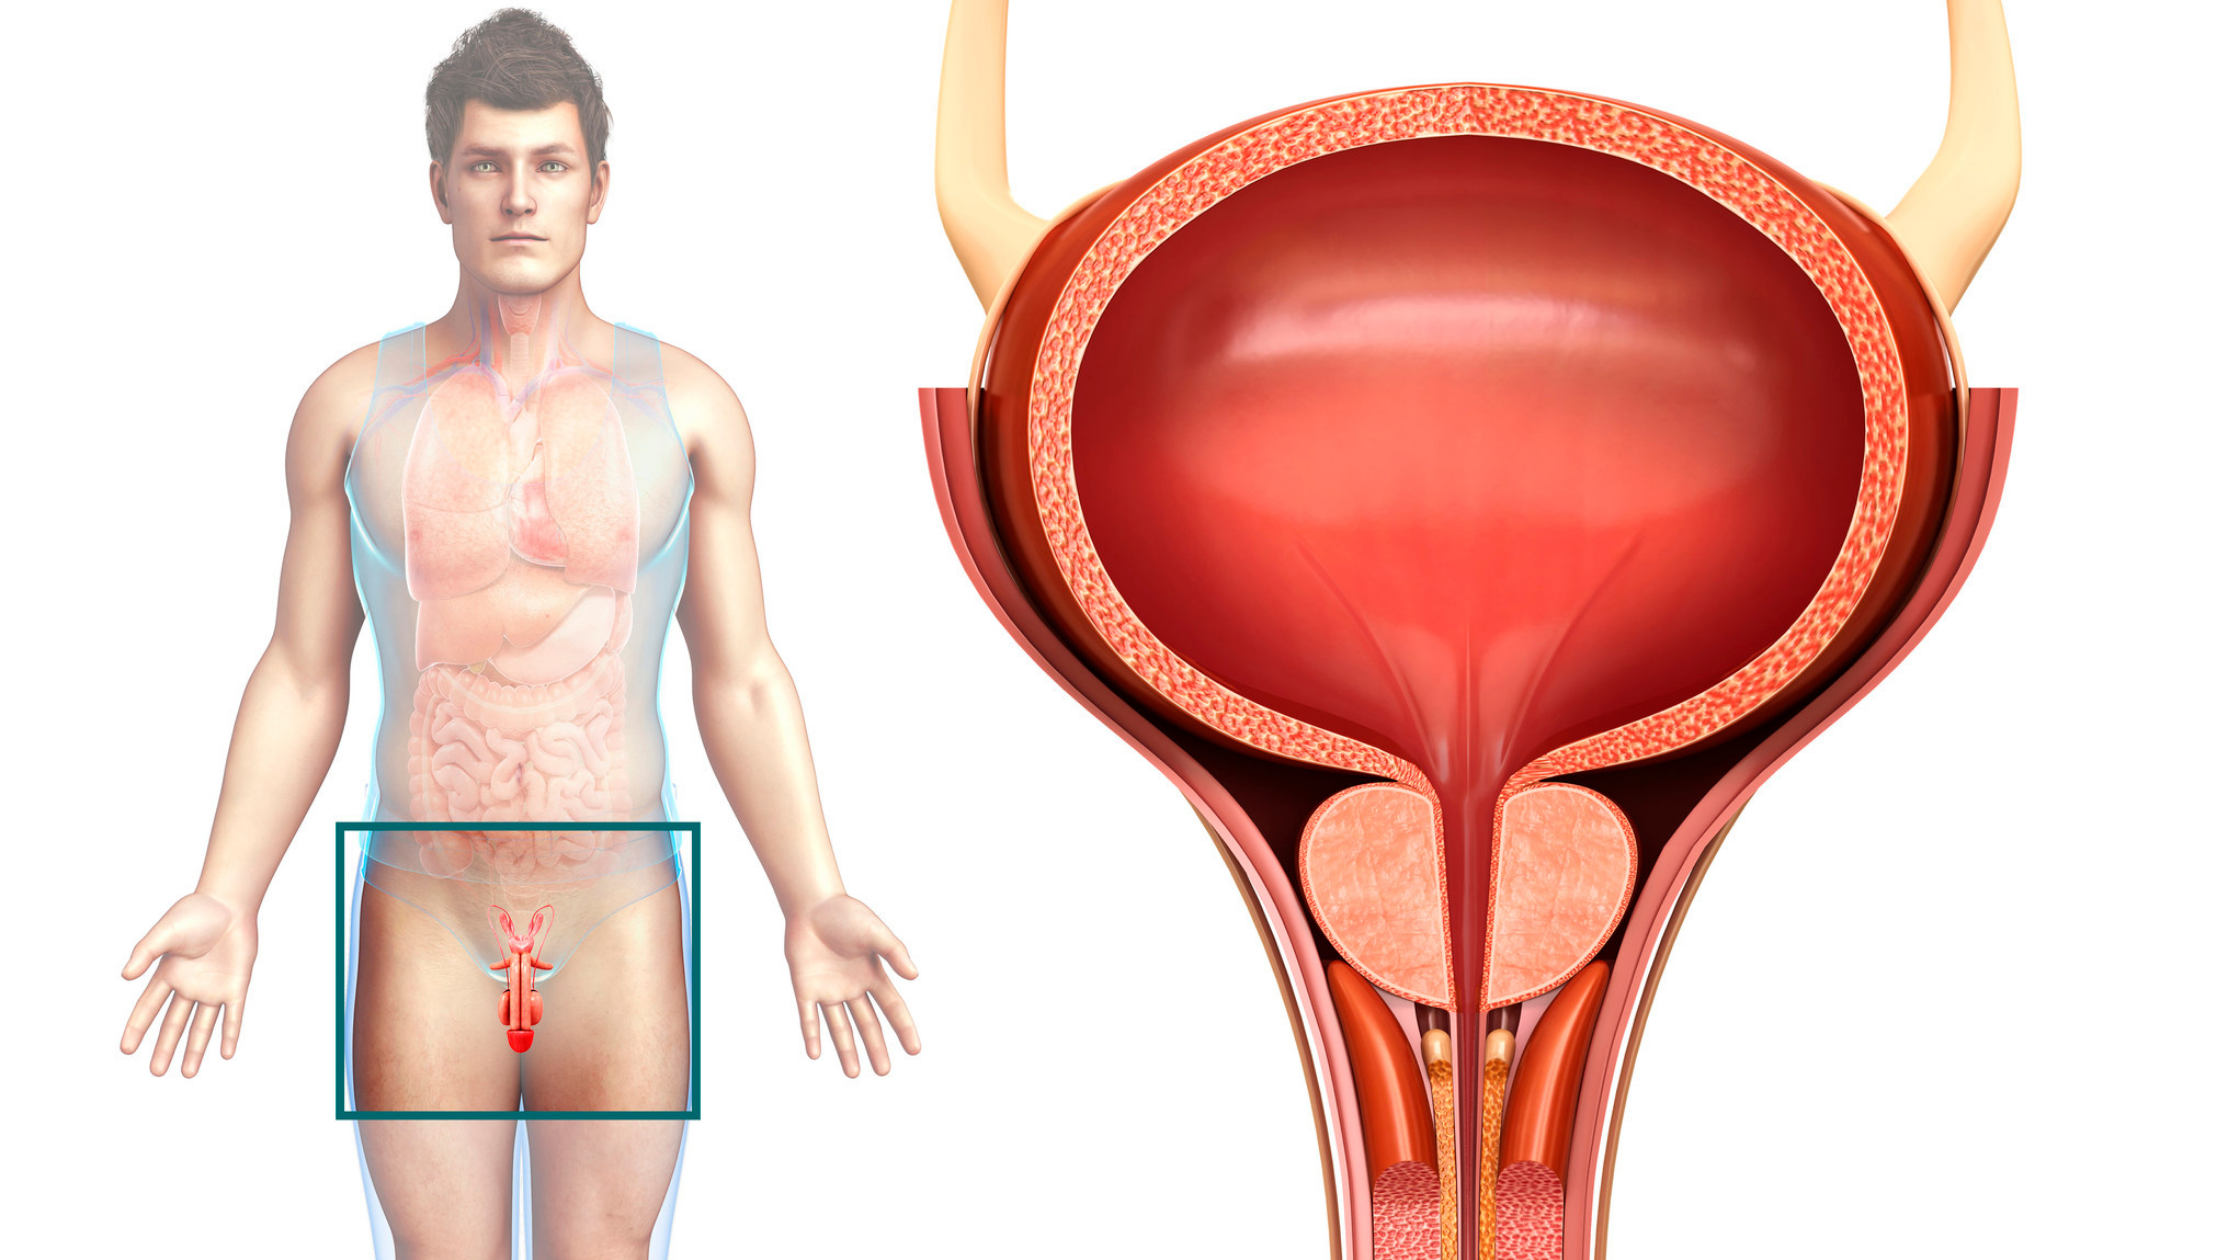 Illustration of male with a zoomed in illustration of bladder